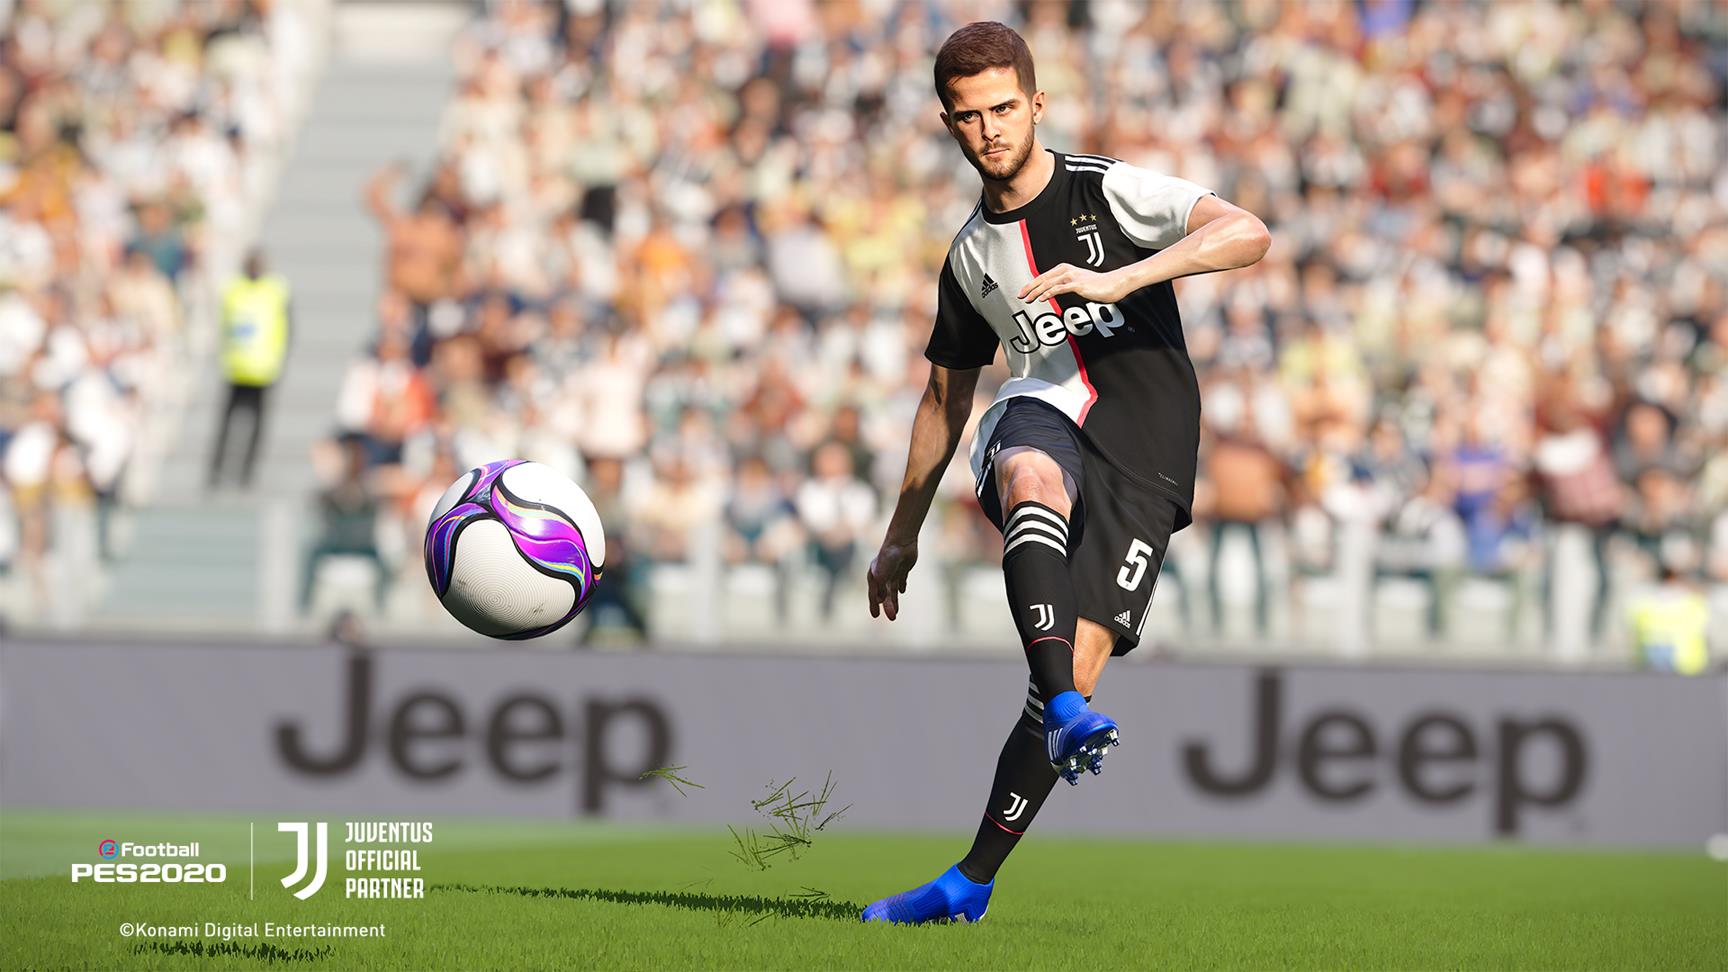 Image for EA's share value drops after losing Juventus rights to Konami